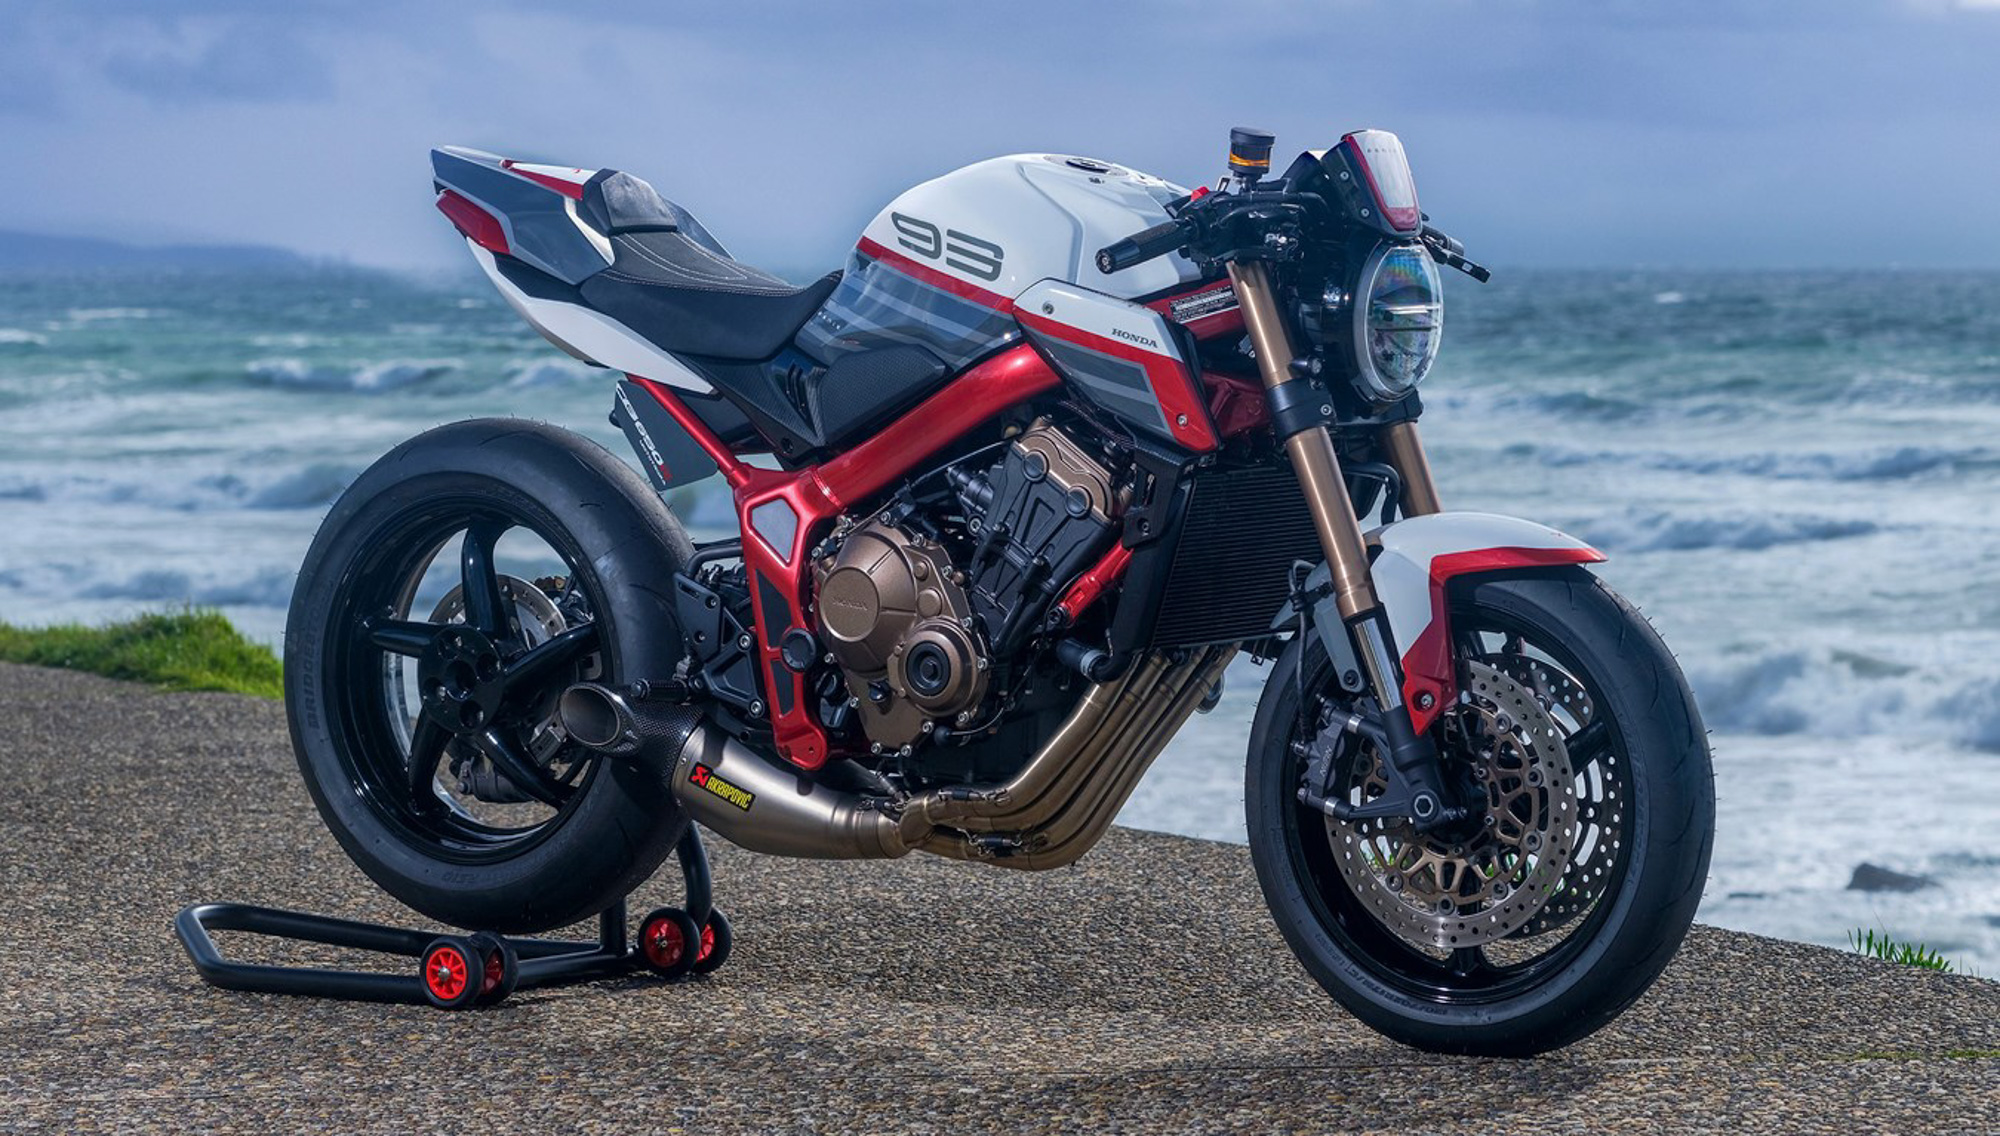 TopGear | These are some fine-looking custom Honda CB650R